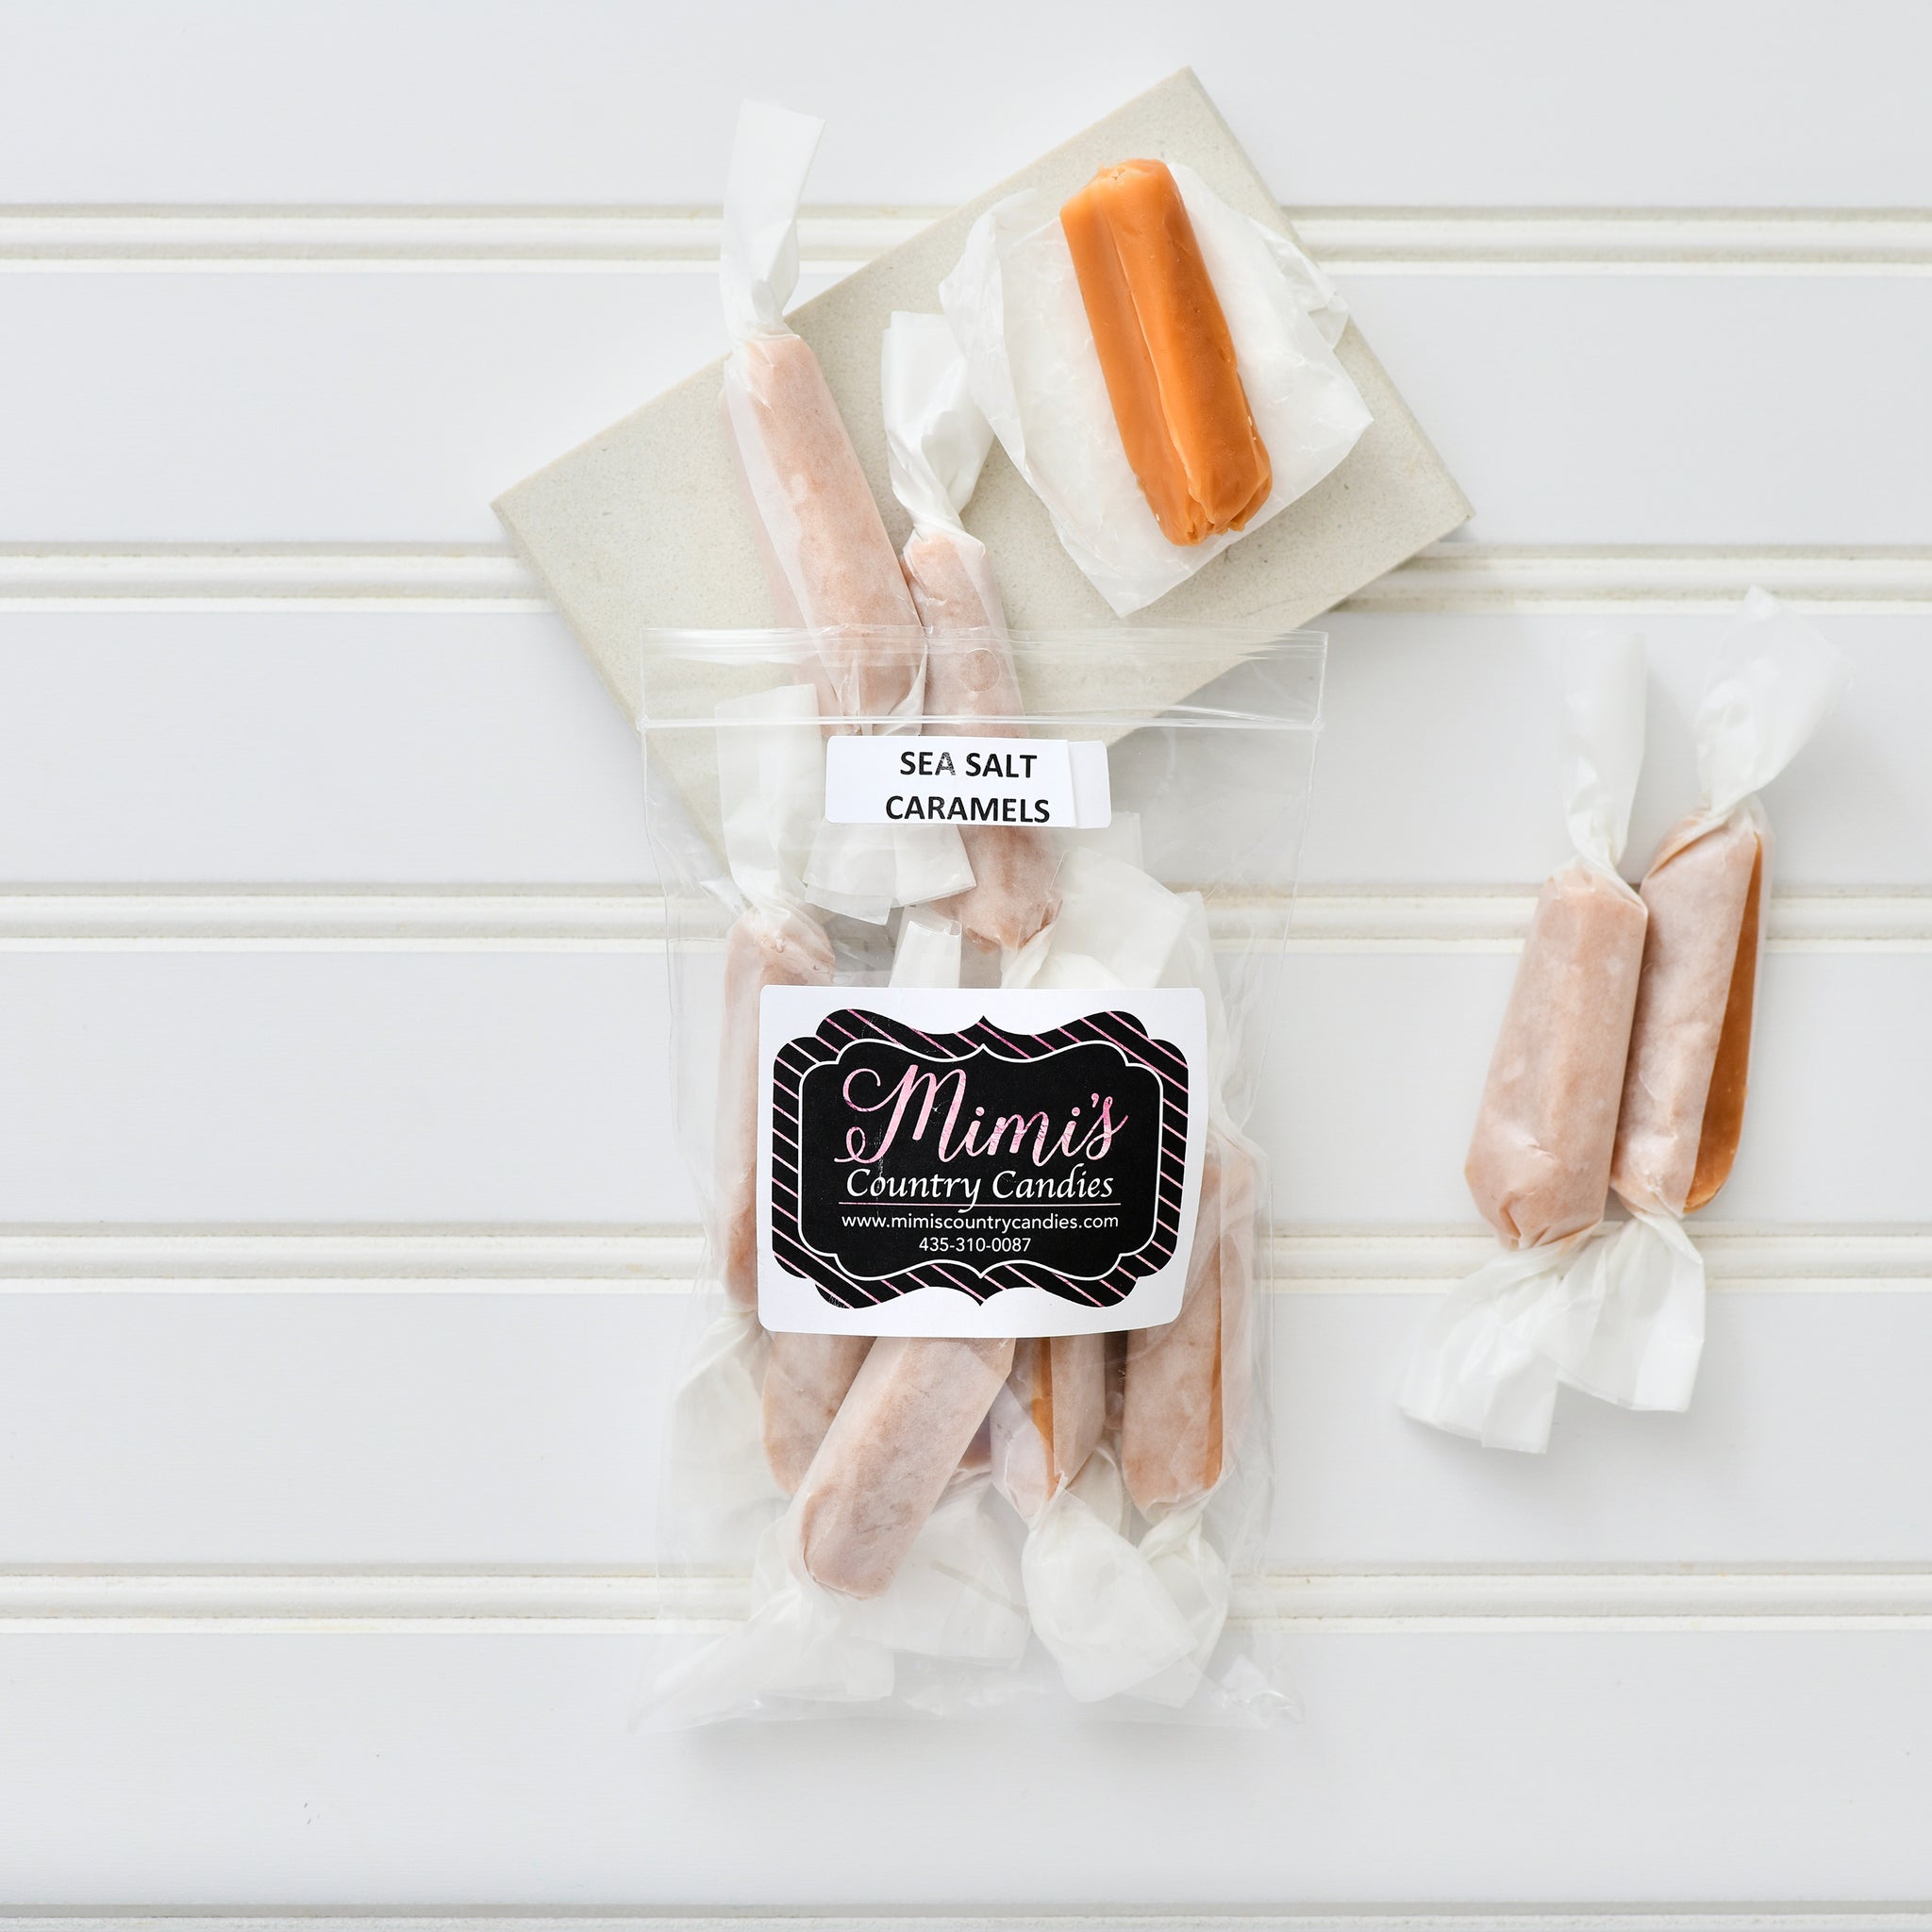 Mimi's Country Candies Sea Salt Caramels